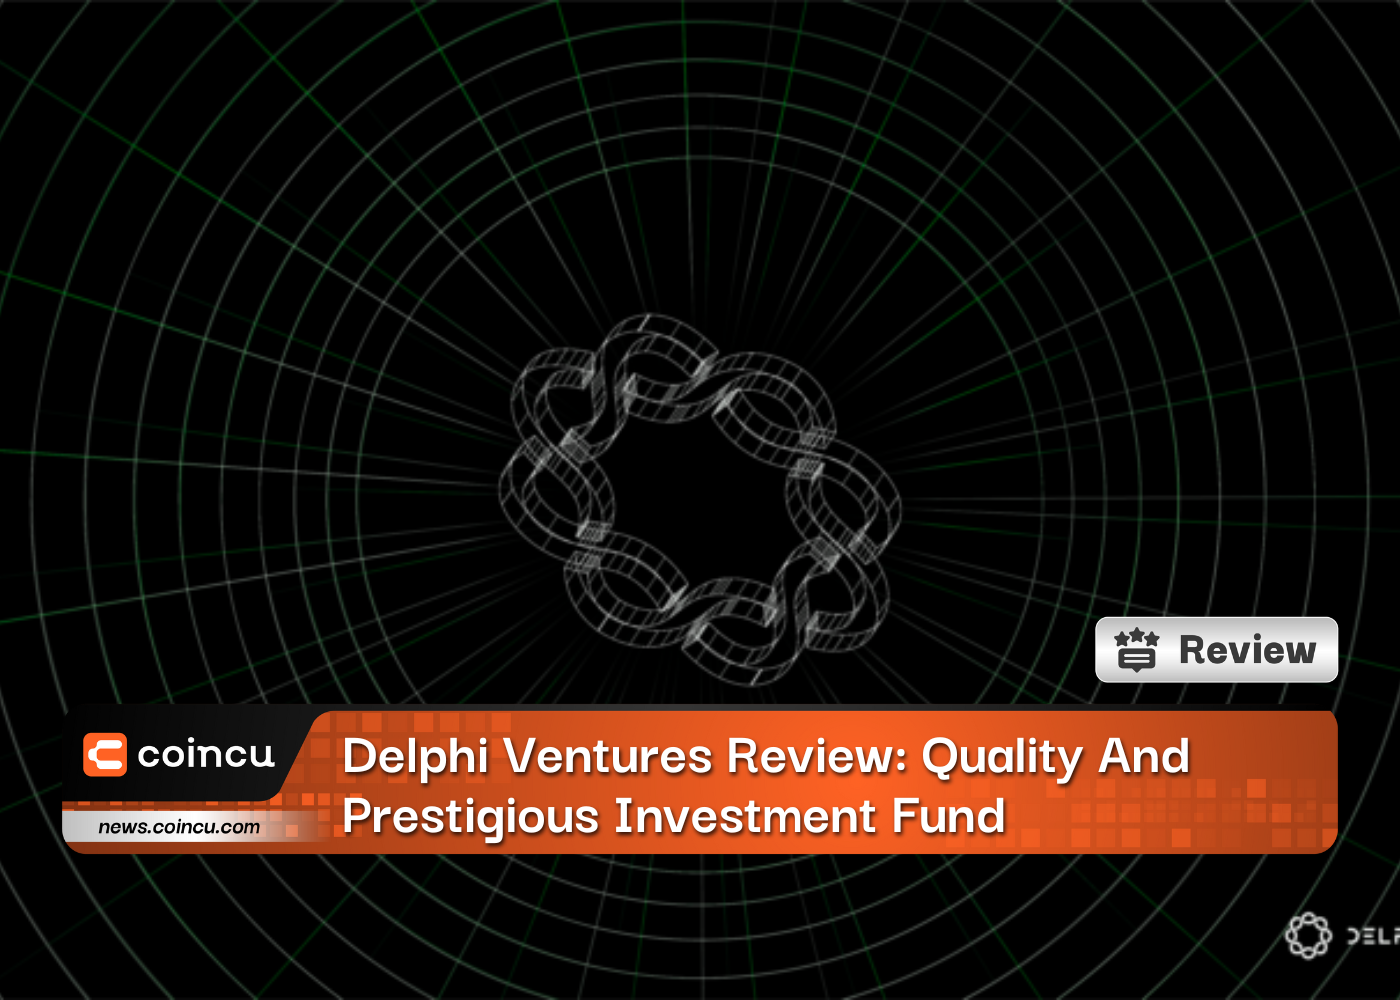 Delphi Ventures Review: Quality And Prestigious Investment Fund